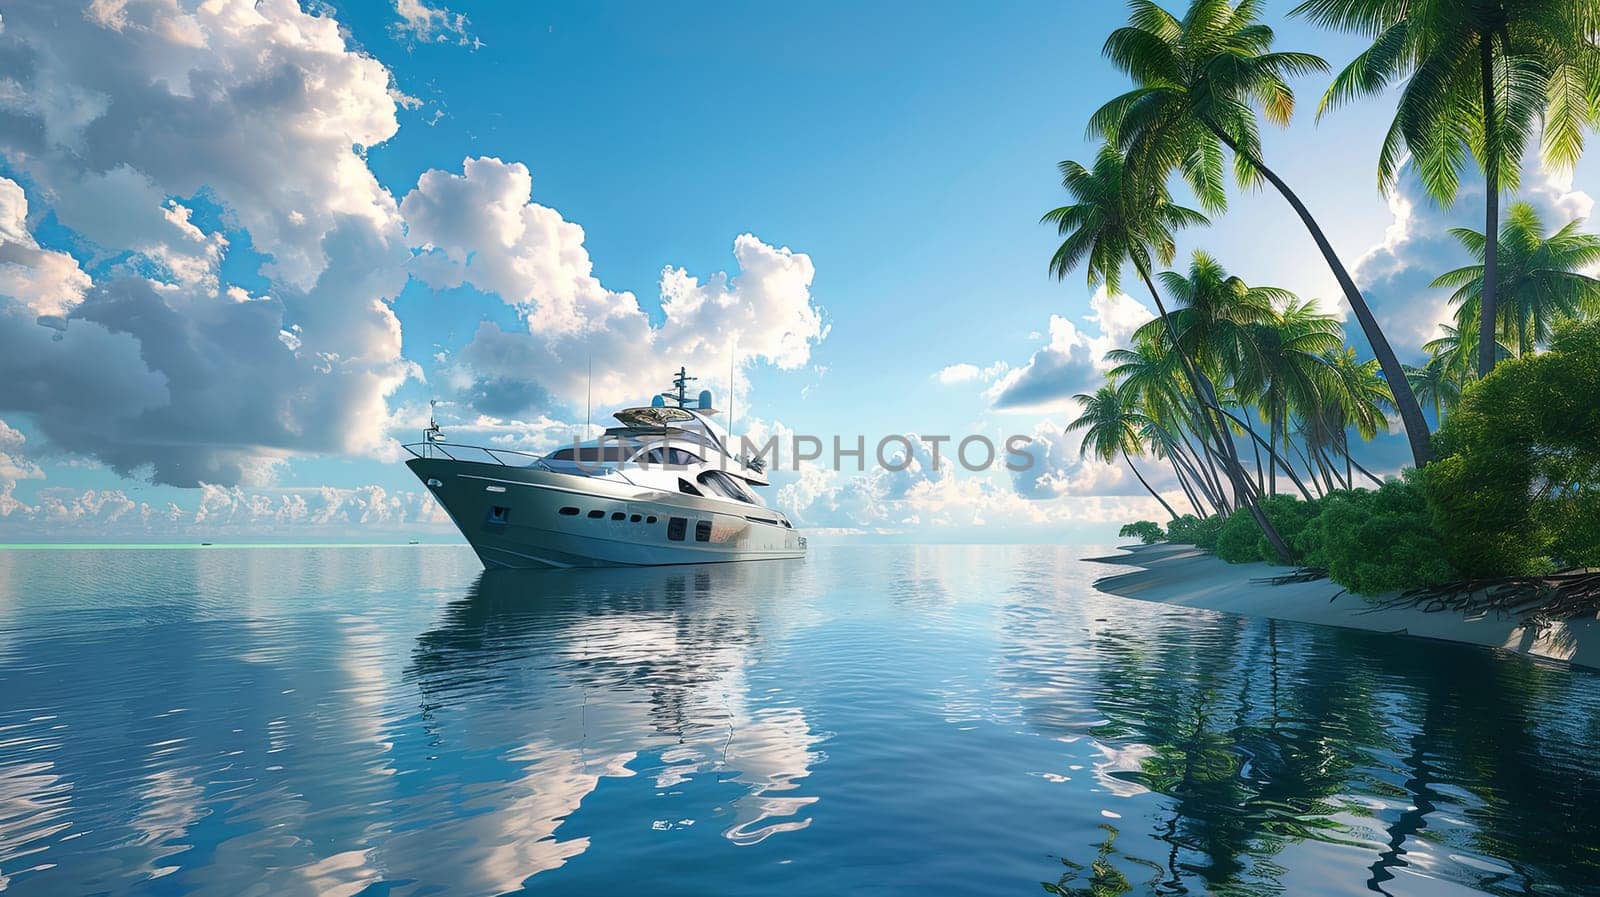 A luxurious yacht peacefully cruising through a calm lagoon, surrounded by lush palm trees on the shore.